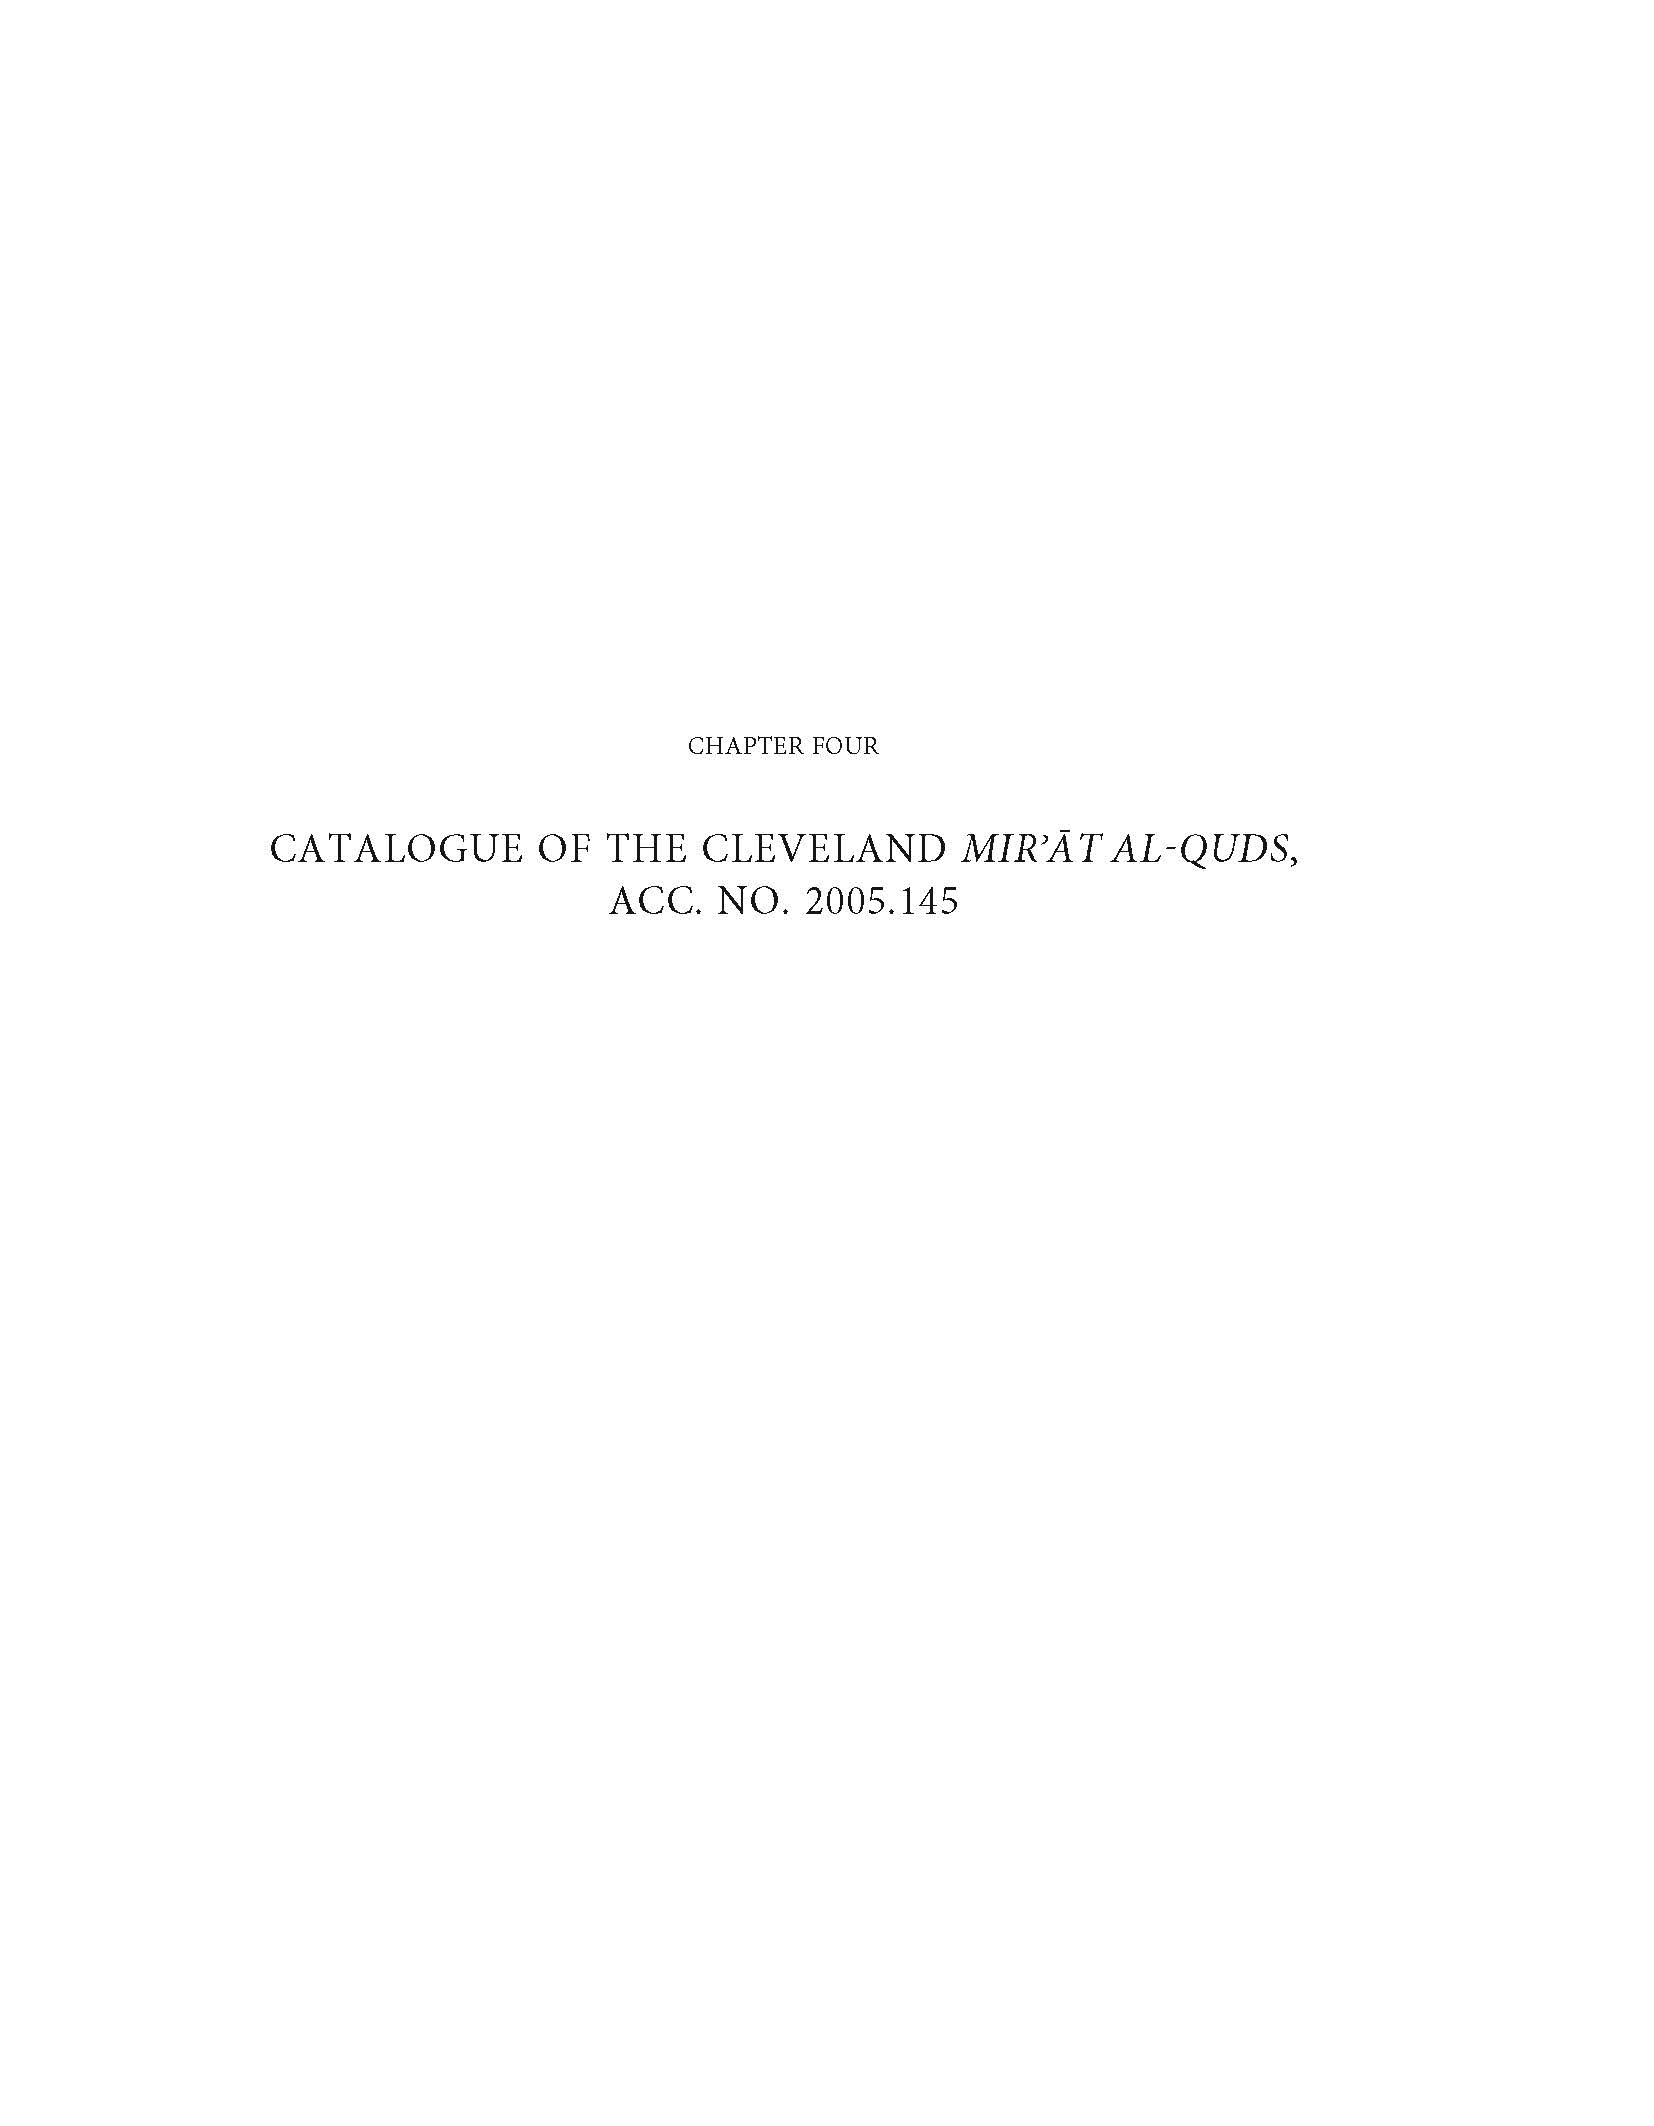 Chapter 4: Catalogue of the Cleveland Mir'at al-Quds, Acc. No. 2005.145